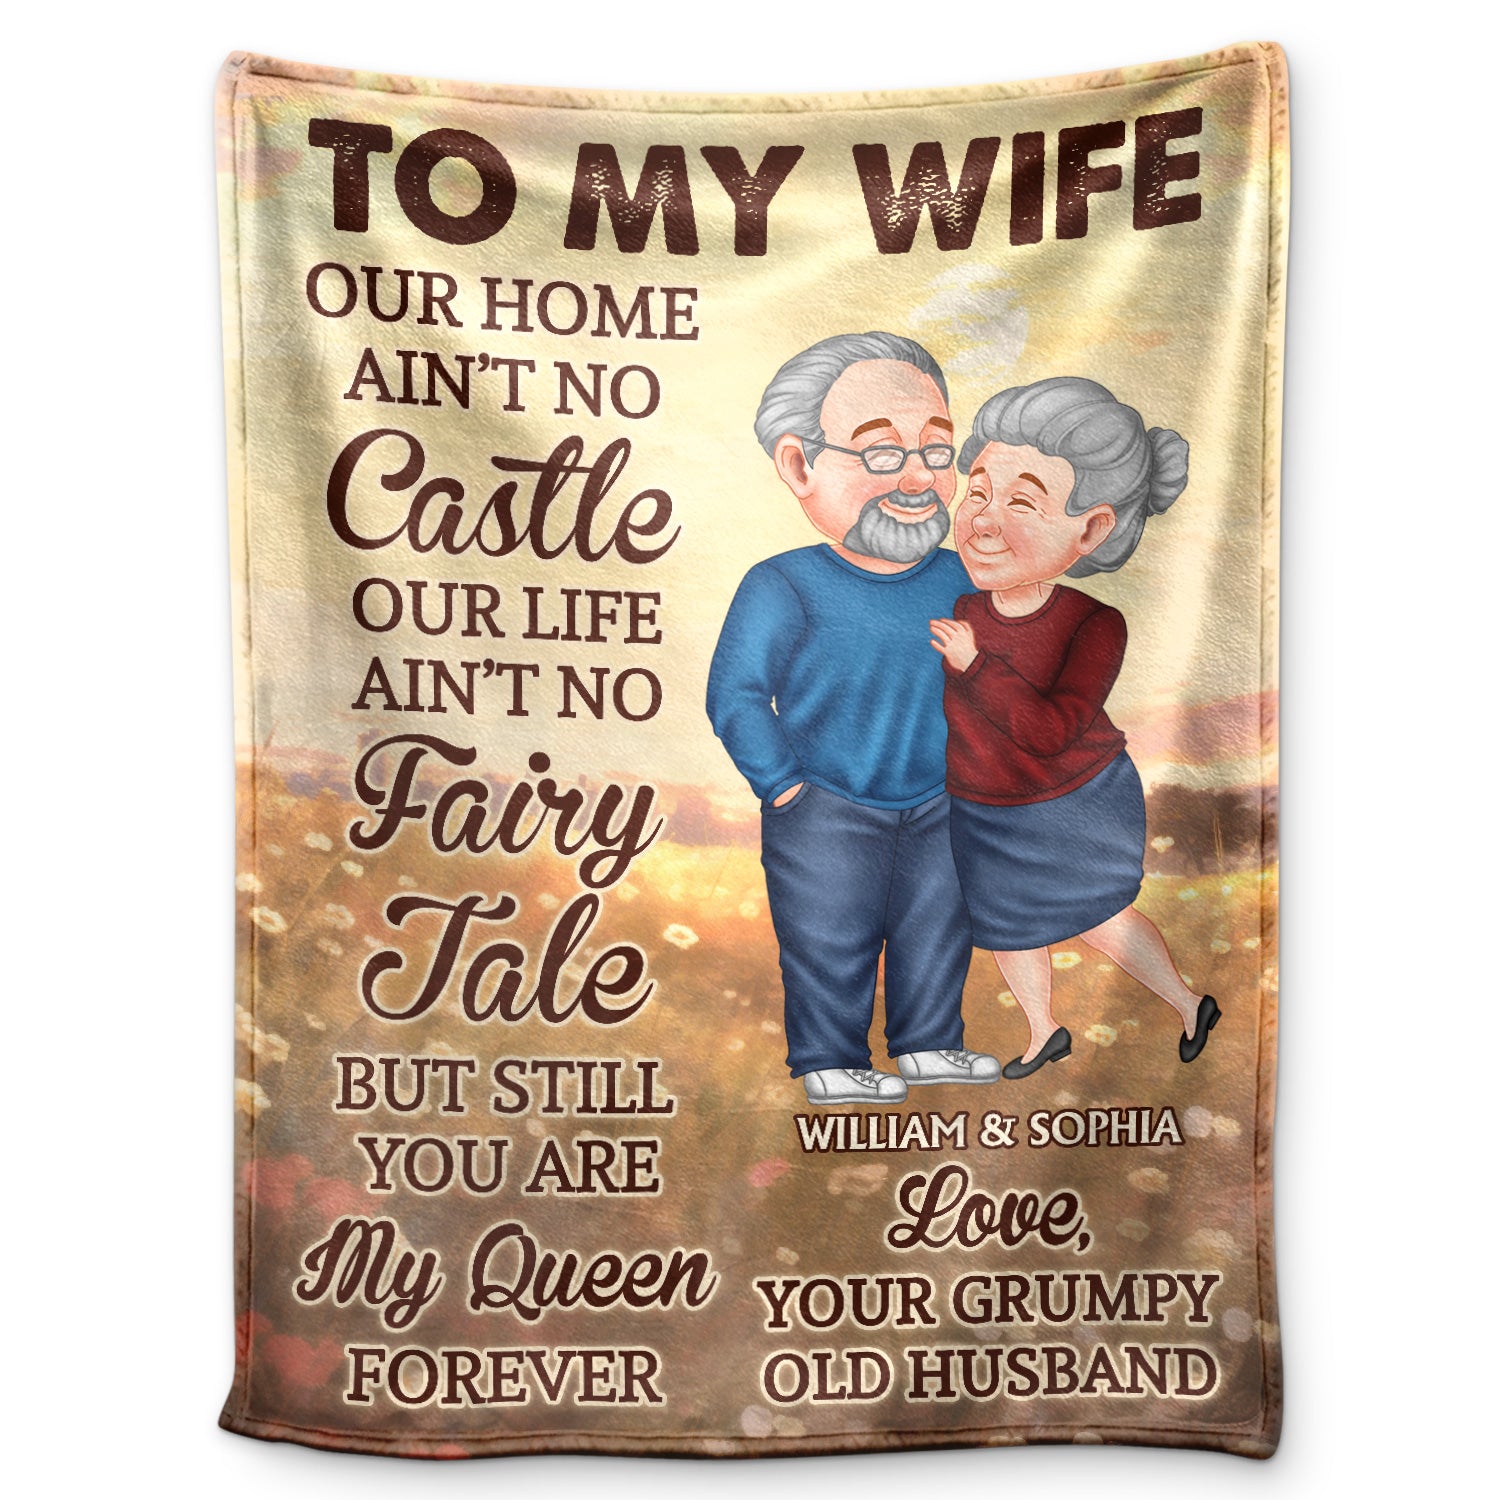 Our Home Ain't No Castle - Anniversary, Loving Gift For Couples, Husband, Wife - Personalized Fleece Blanket